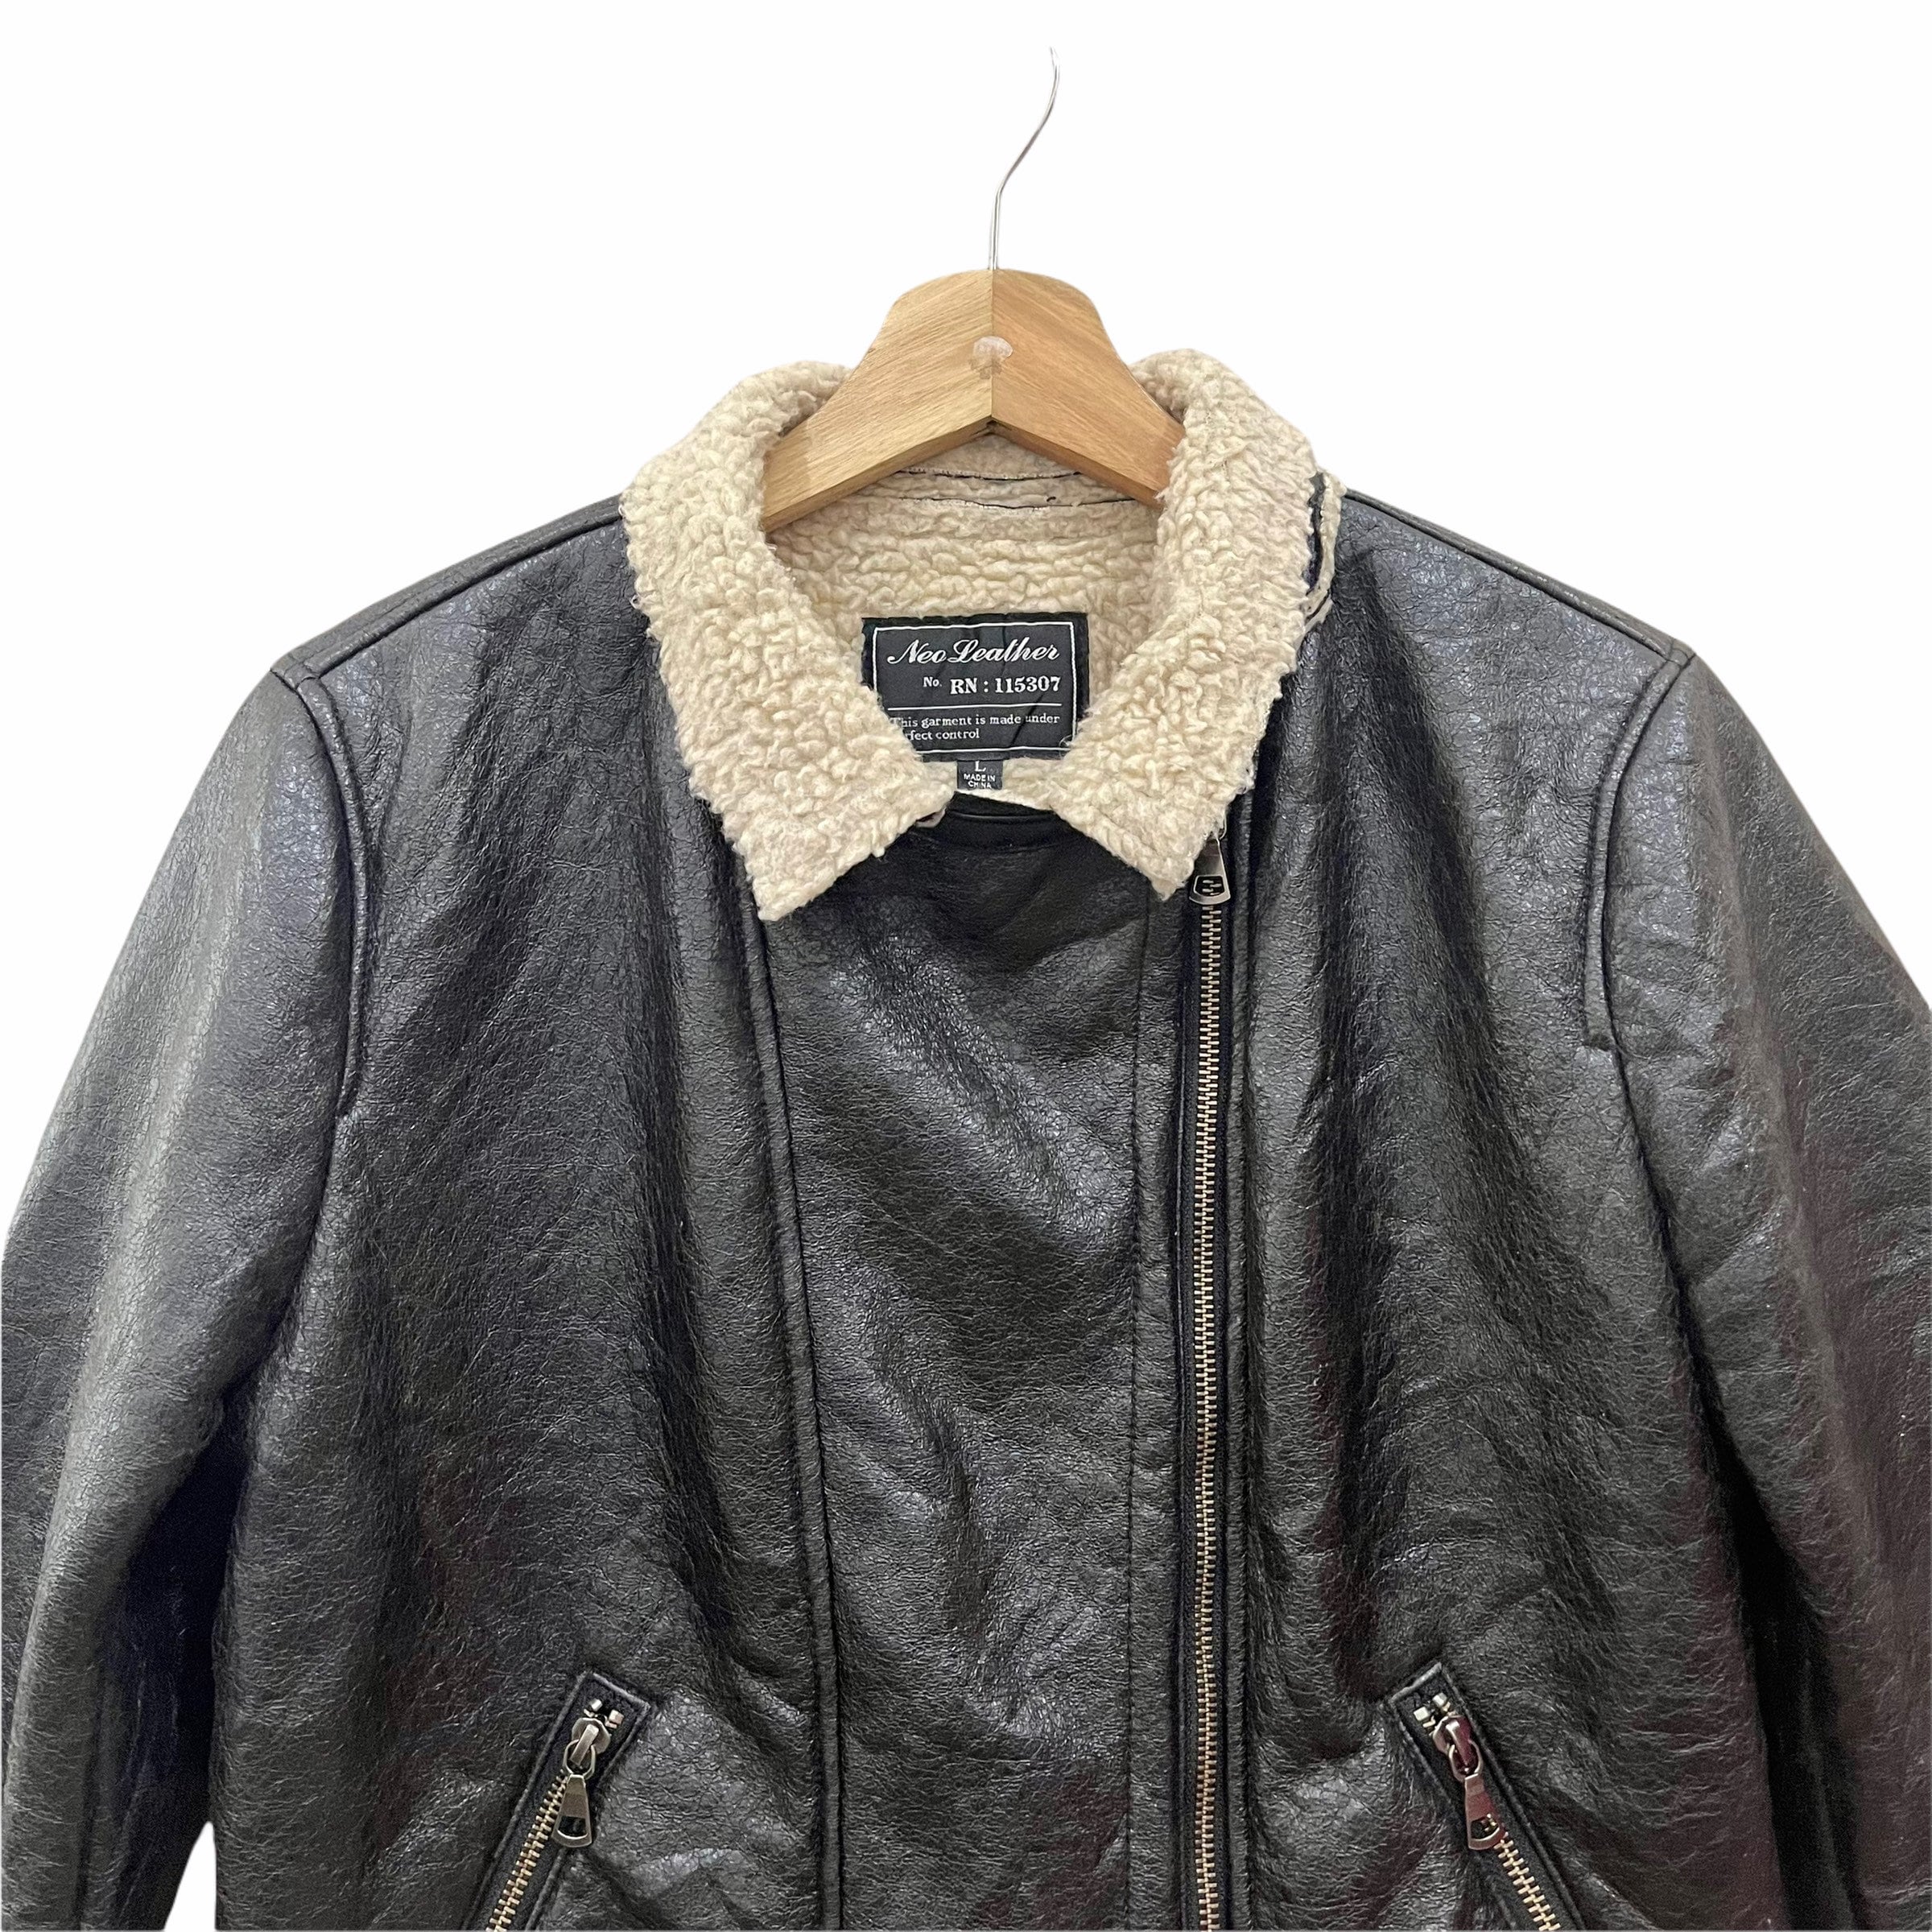 Uniqlo Biker Leather Jacket Mens Fashion Coats Jackets and Outerwear on  Carousell